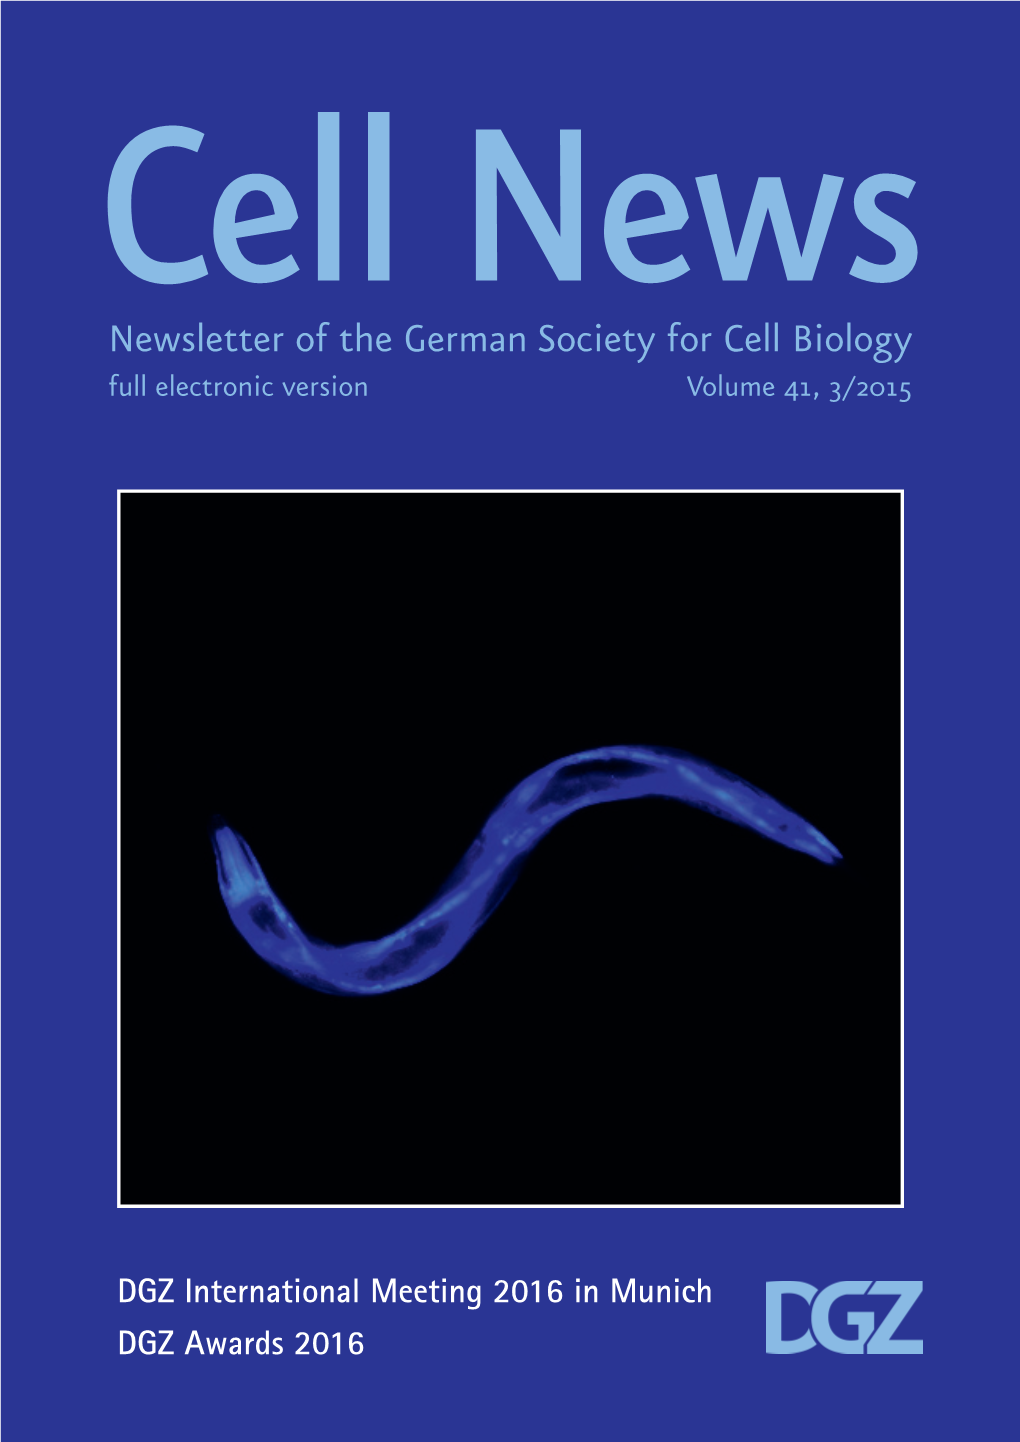 Newsletter of the German Society for Cell Biology Full Electronic Version Volume 41, 3/2015